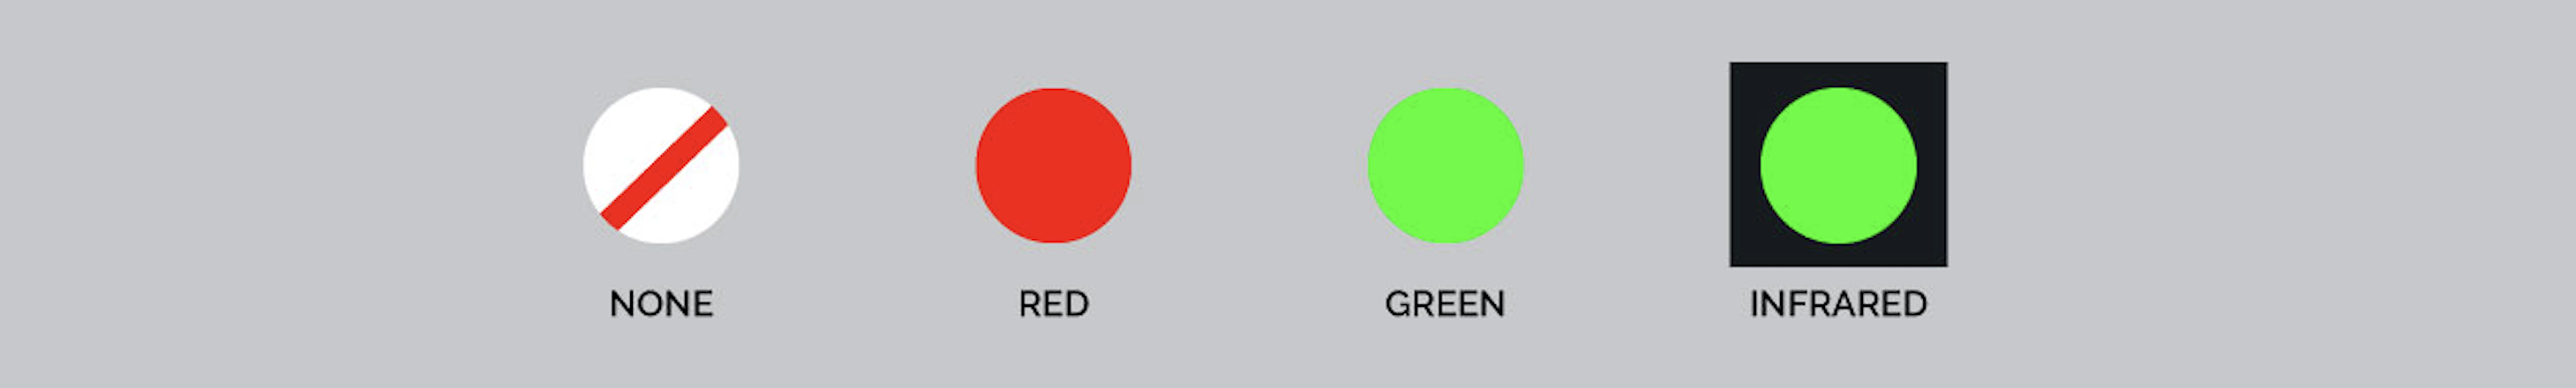 Banner Image showing Different Blackbeard Laser Options: none, red, green and infrared